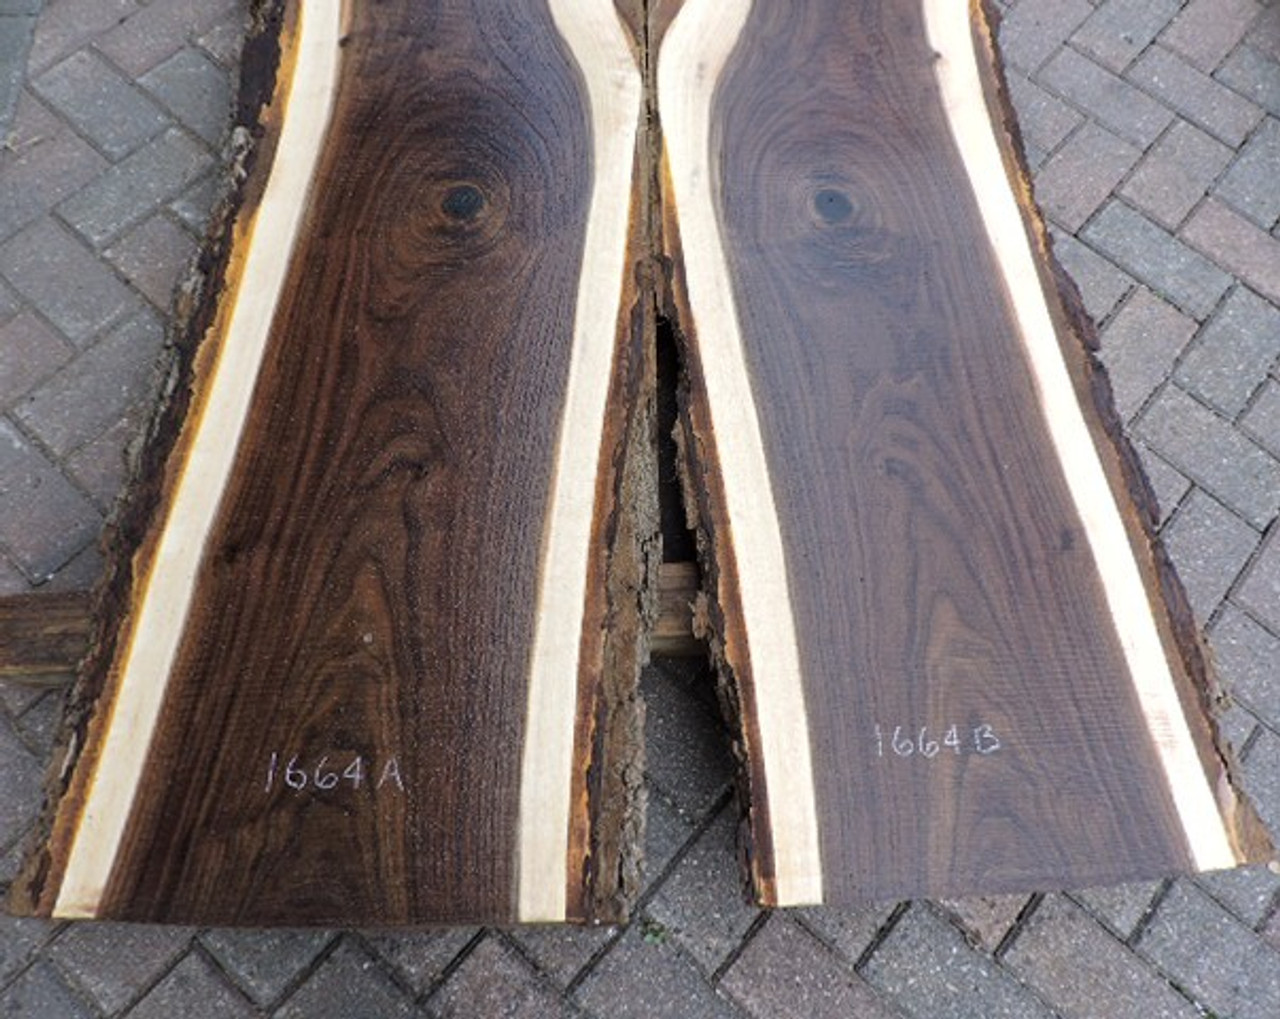 8/4 Bookmatched Walnut Live Edge Table Top Slabs - 1664 AB